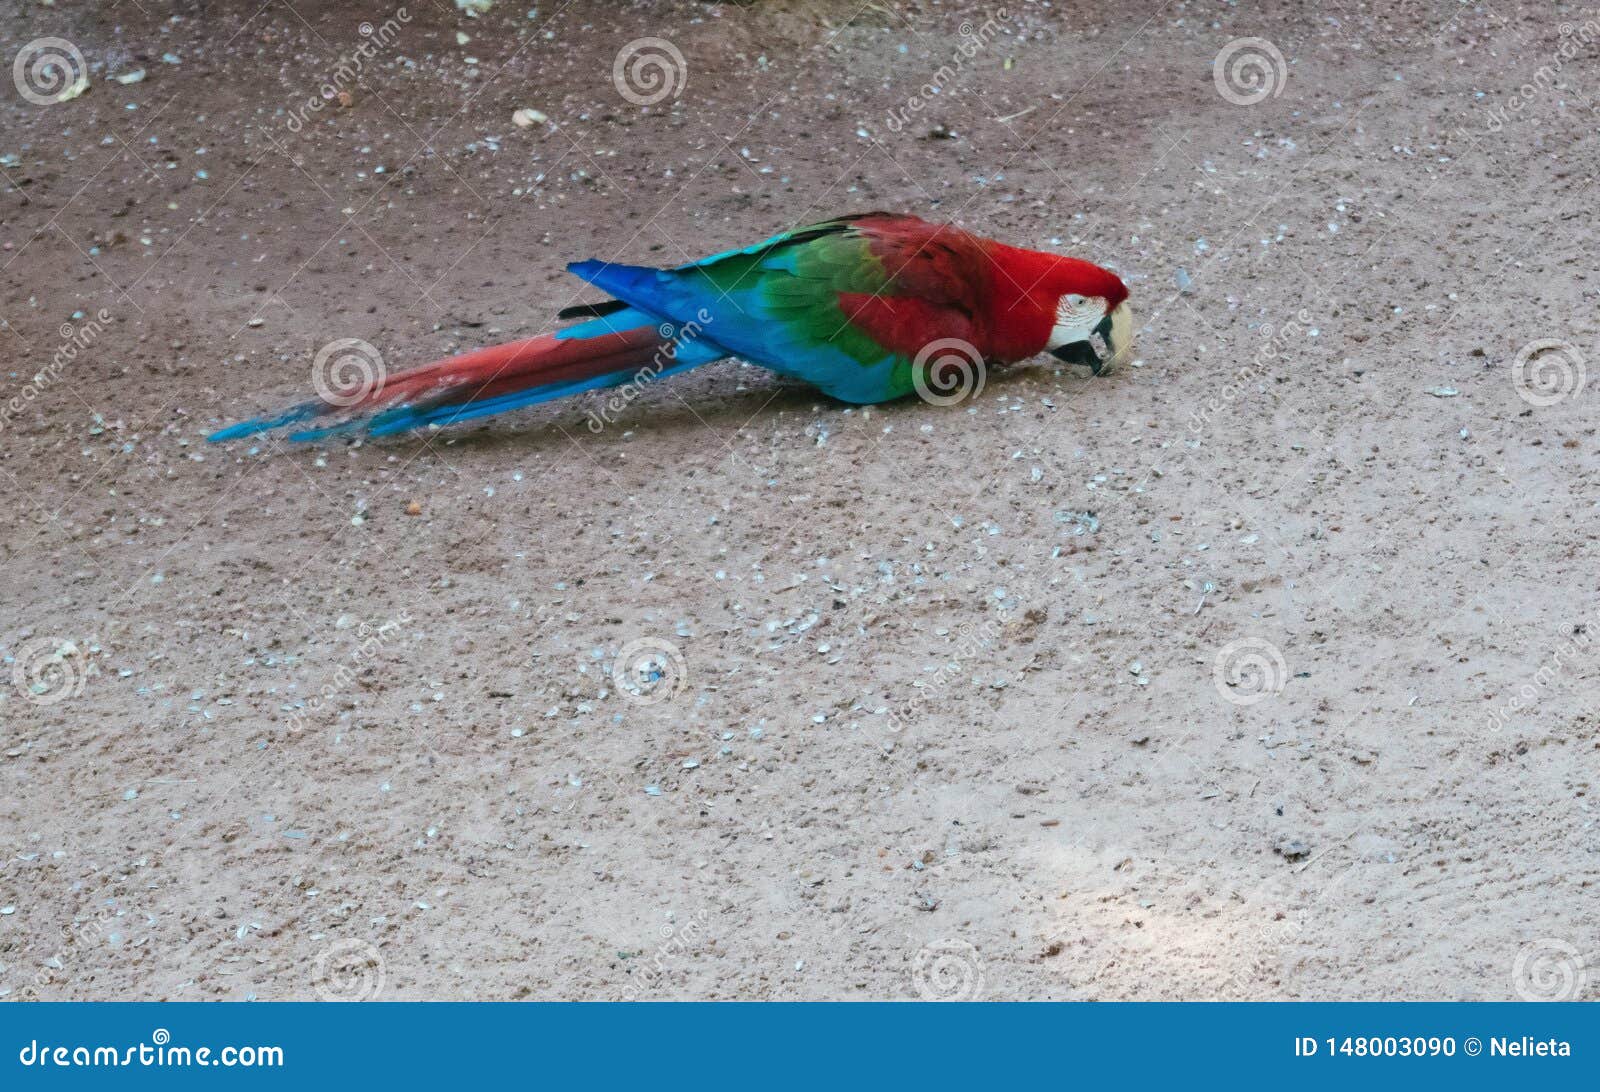 scarlet macaw eating from the ground